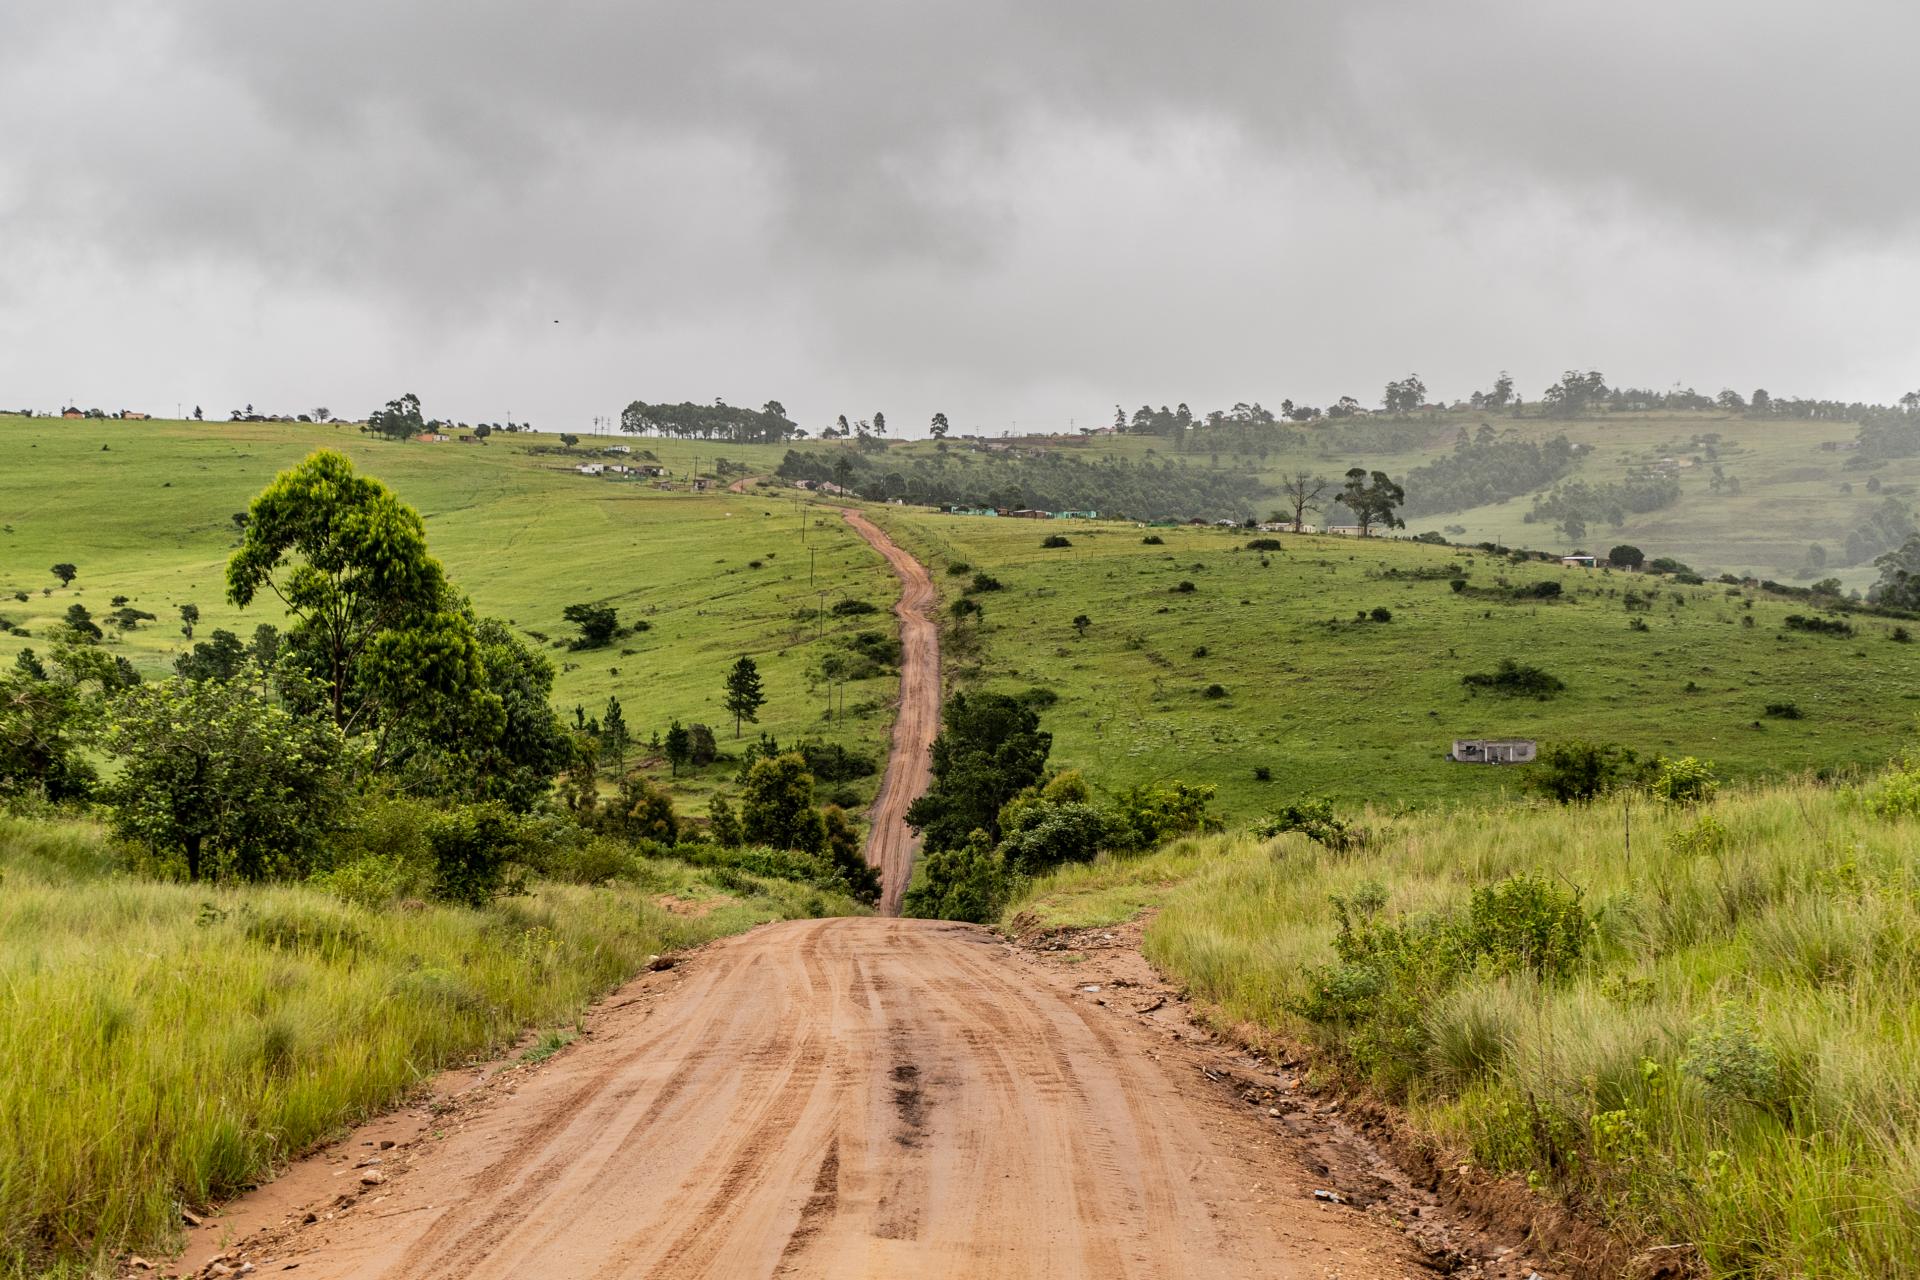 A picture of the road leading to the village Vuma in Mbongolwane, KZN